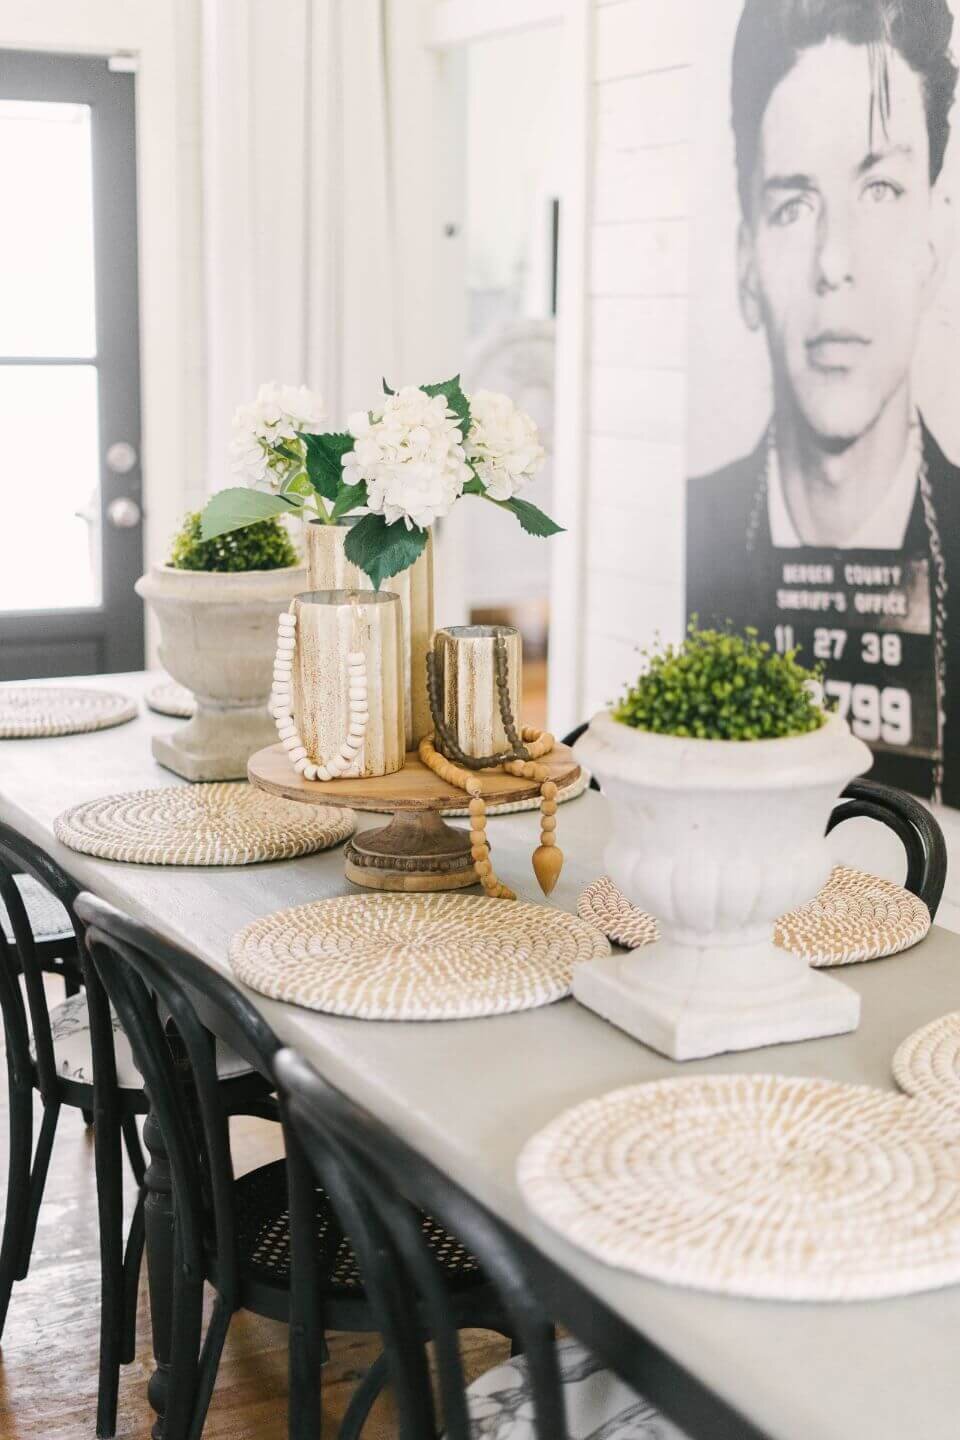 The Morrow House Home Tour - Historic Waco AirBnb - Cottage Home external - As Seen in Fixer Upper Season 5 - Dining Room 3 -农万博赞助意大利甲级联赛舍生活。jpg